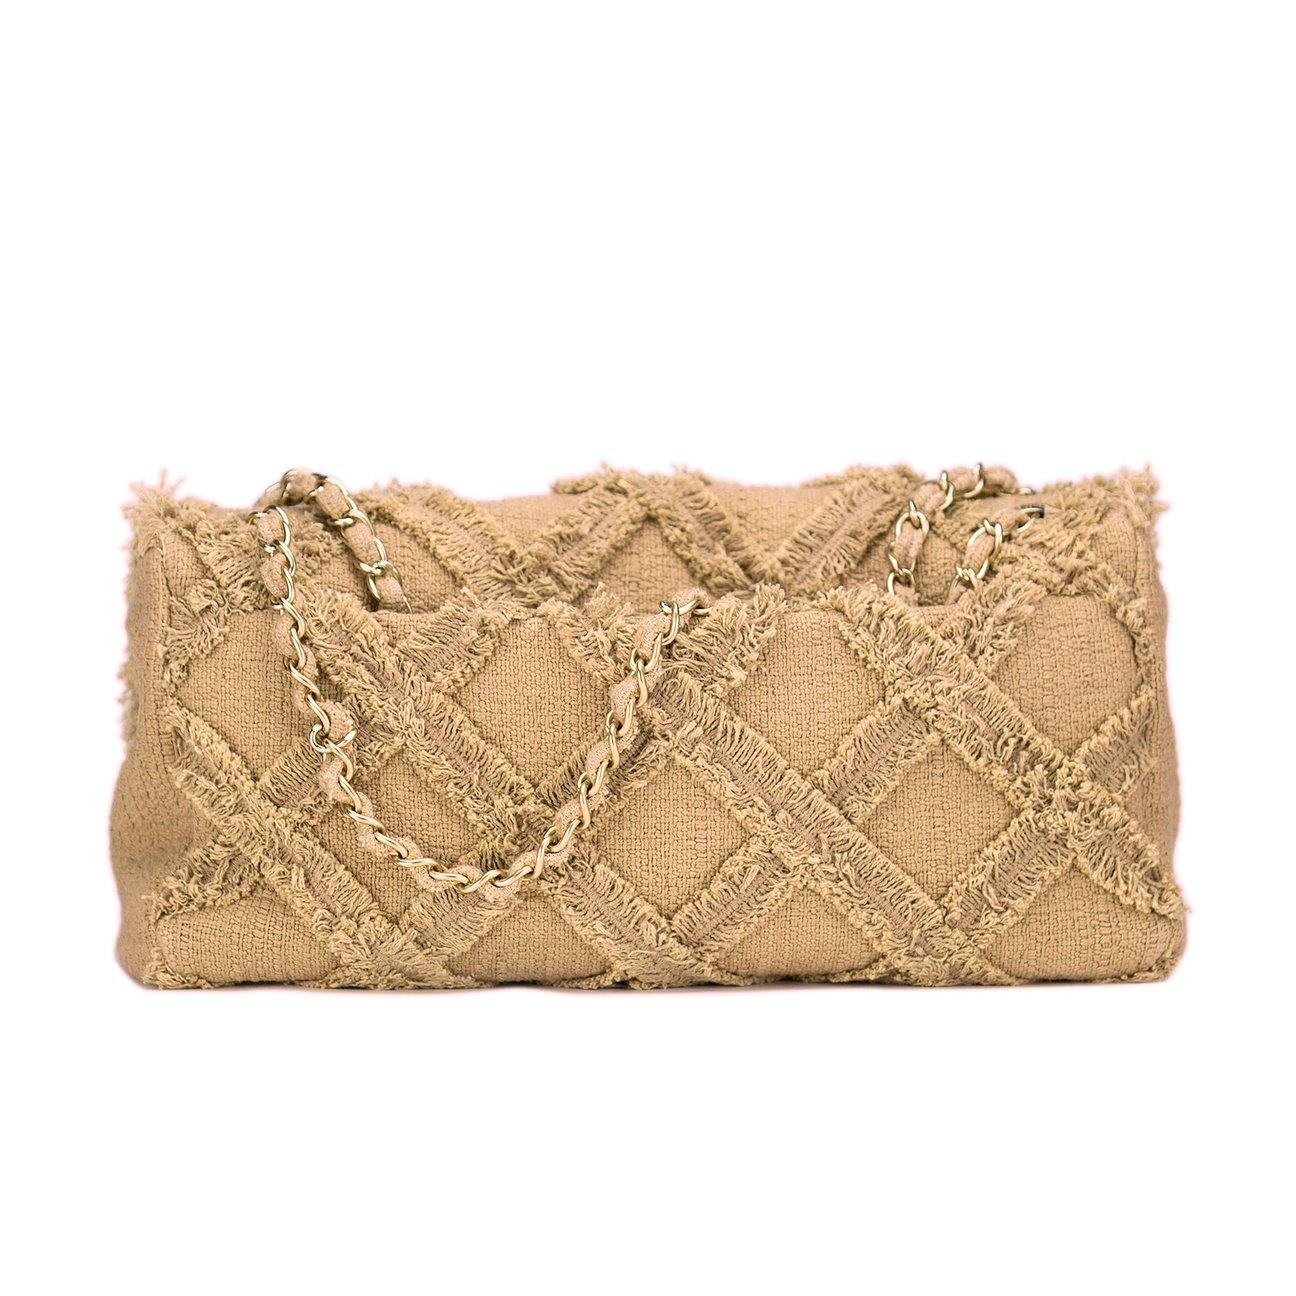 Chanel extra large sized beige tweed crochet flap

2009
Antique gold hardware
Large CC logo
Magnetic clasp closure
Interior beige canvas lining
Interior center zippered pocket
Two additional interior open pockets
Interior leather key chain